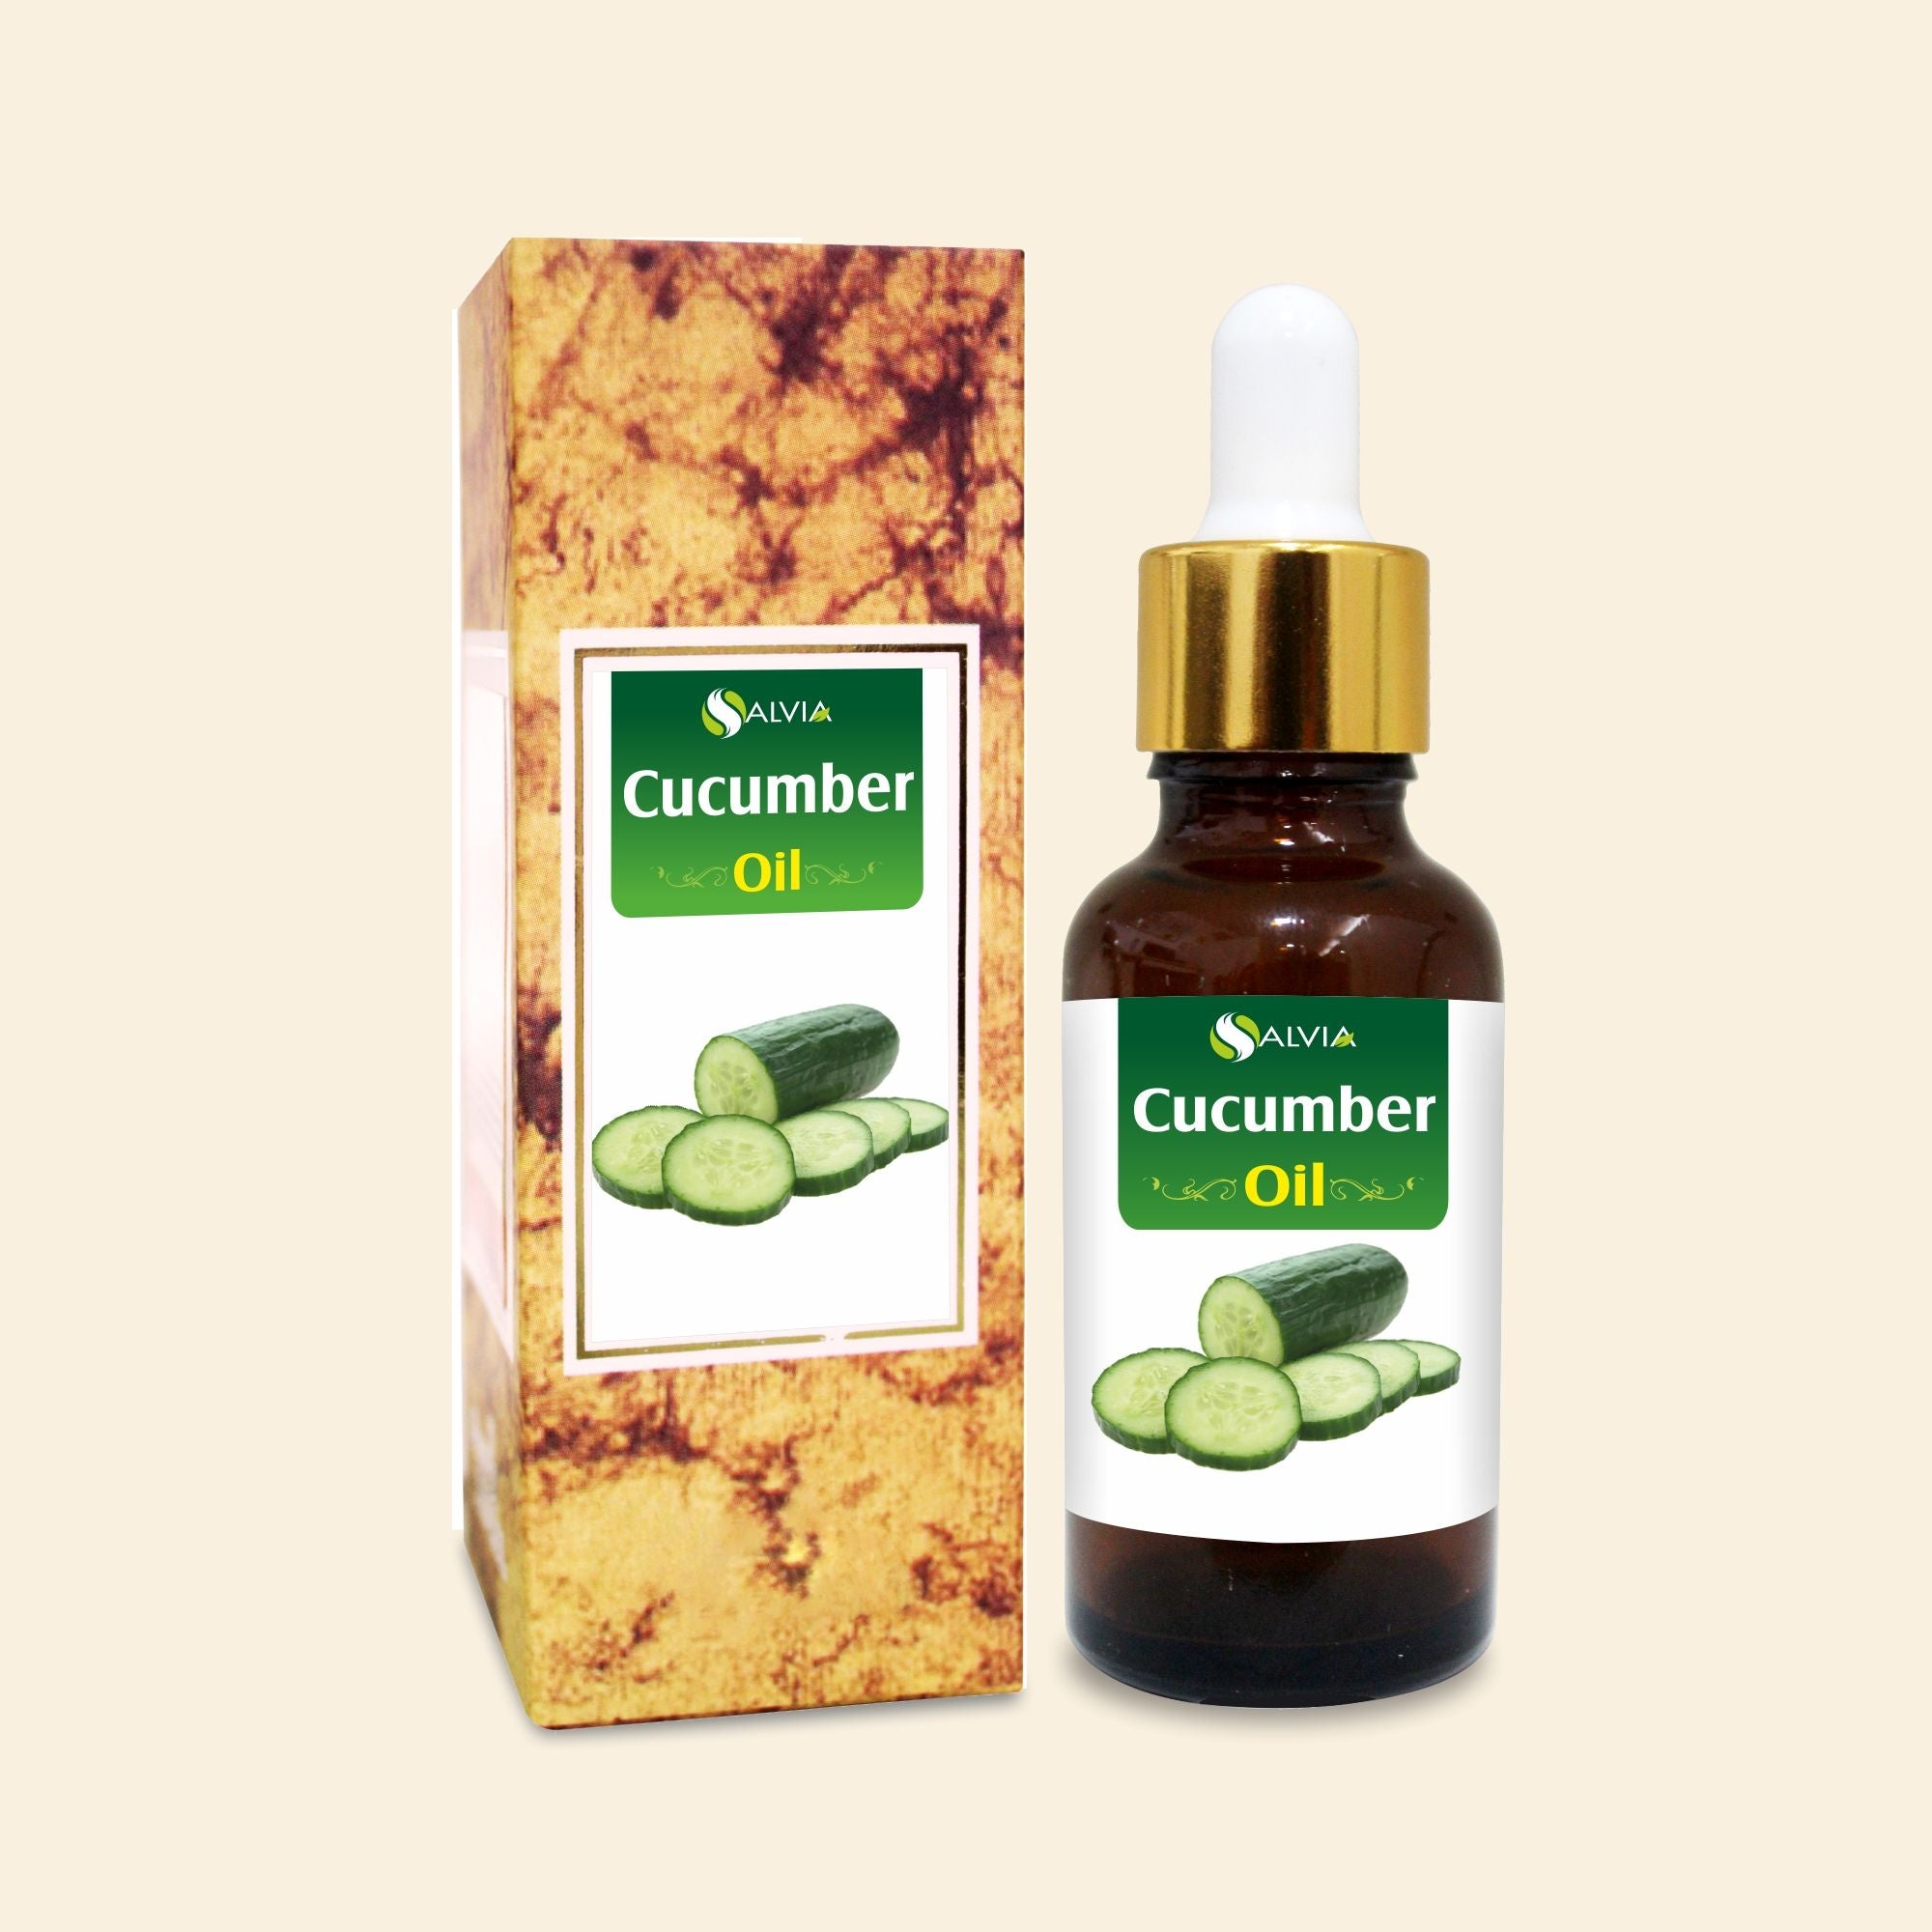 Salvia Natural Carrier Oils Cucumber Oil 100% Natural Pure Carrier Oil